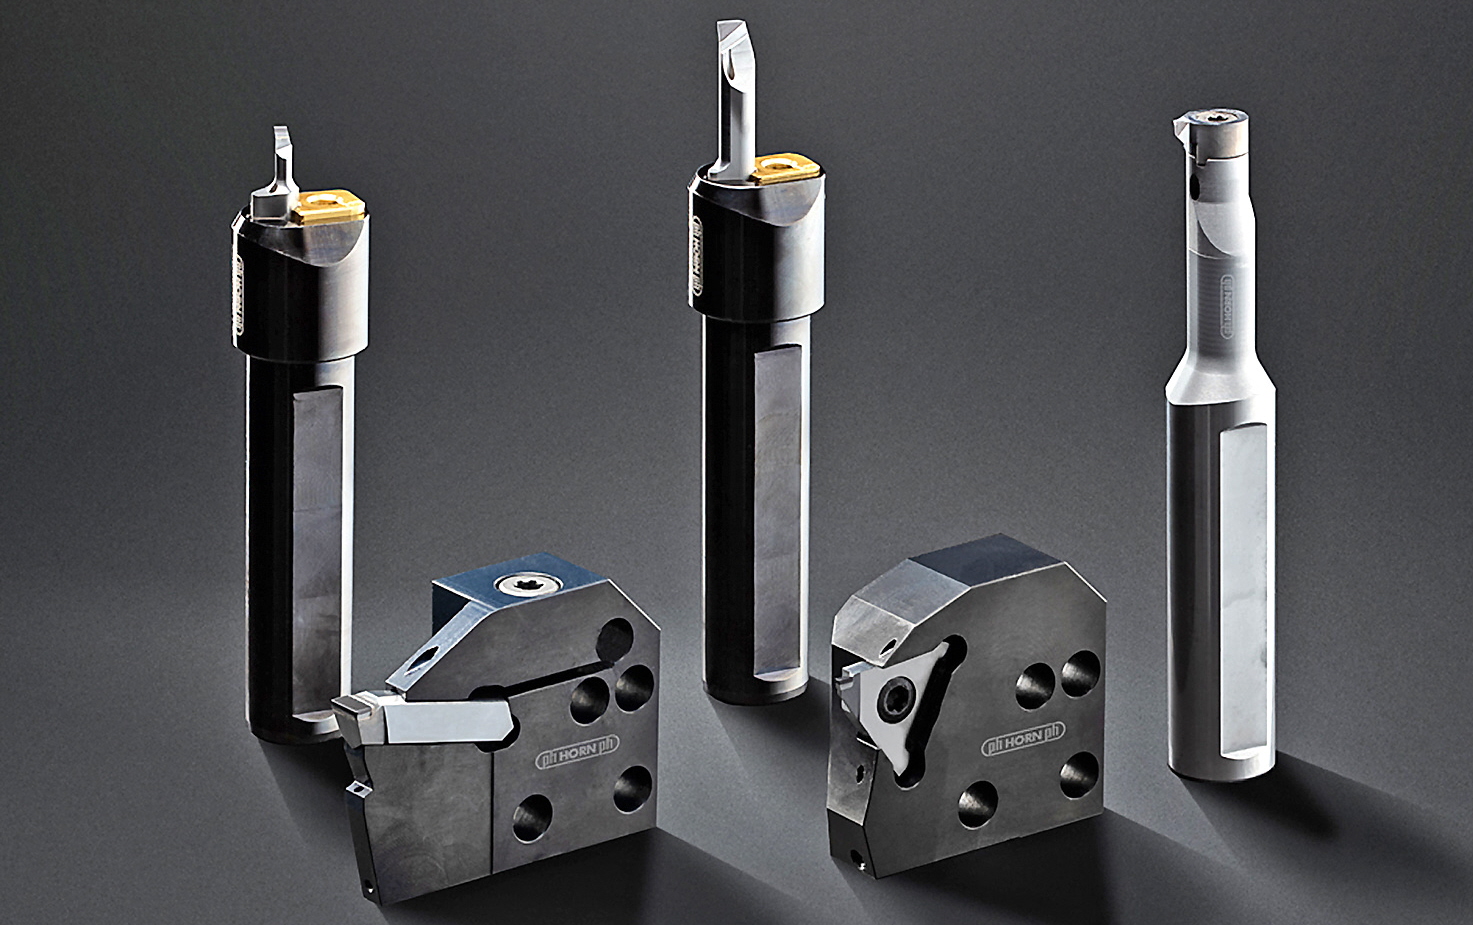 Horn unveils CBN cutting tools